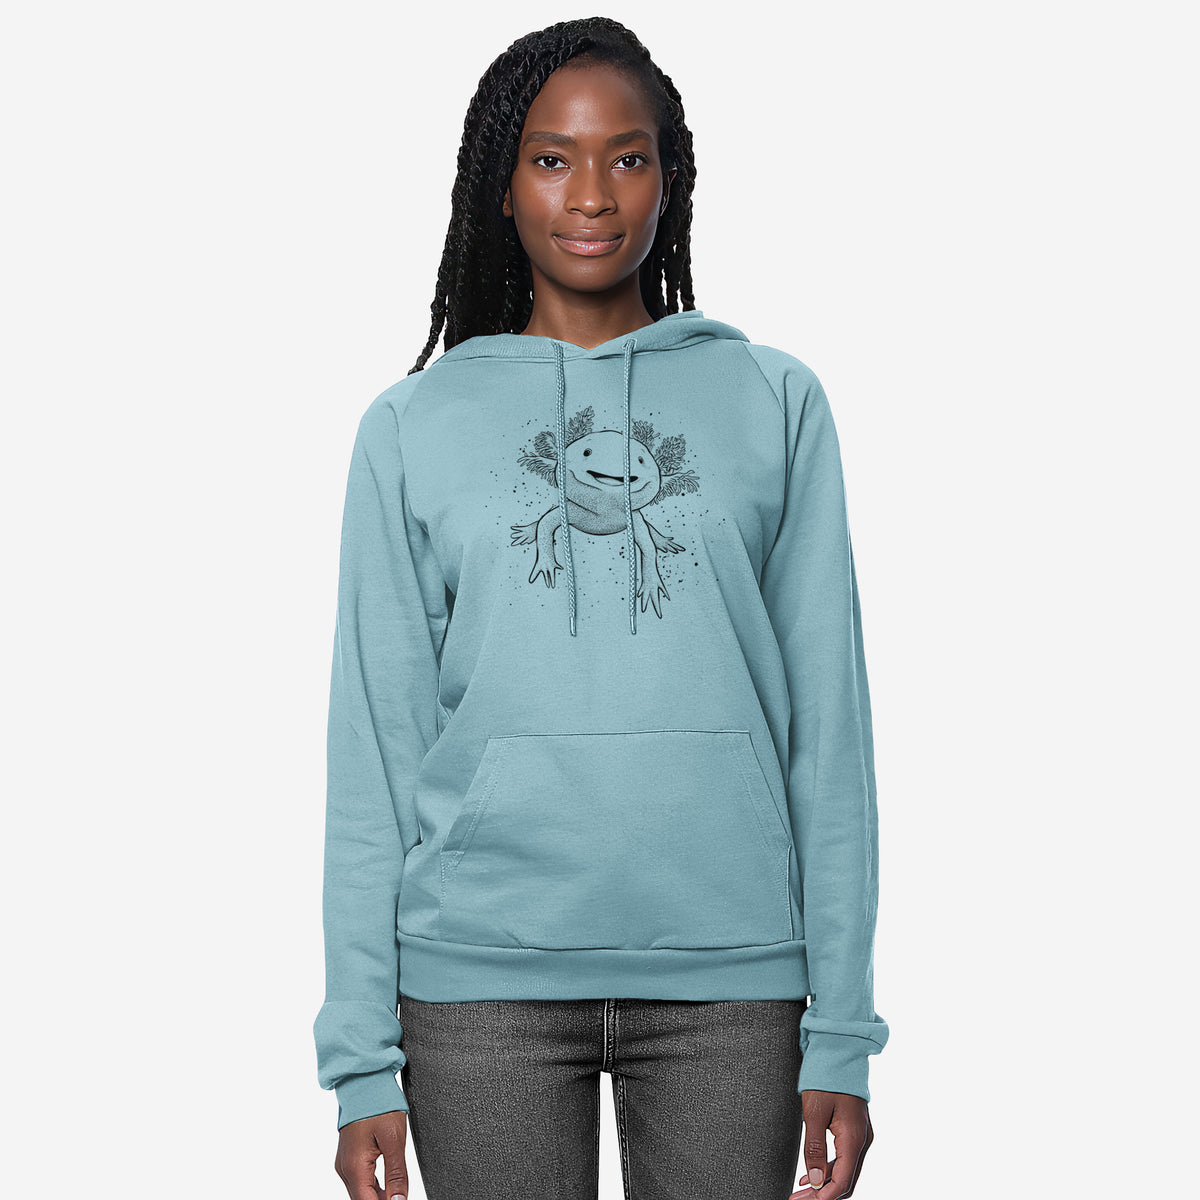 Axolotl - Ambystoma mexicanum - Unisex Pullover Hoodie - Made in USA - 100% Organic Cotton